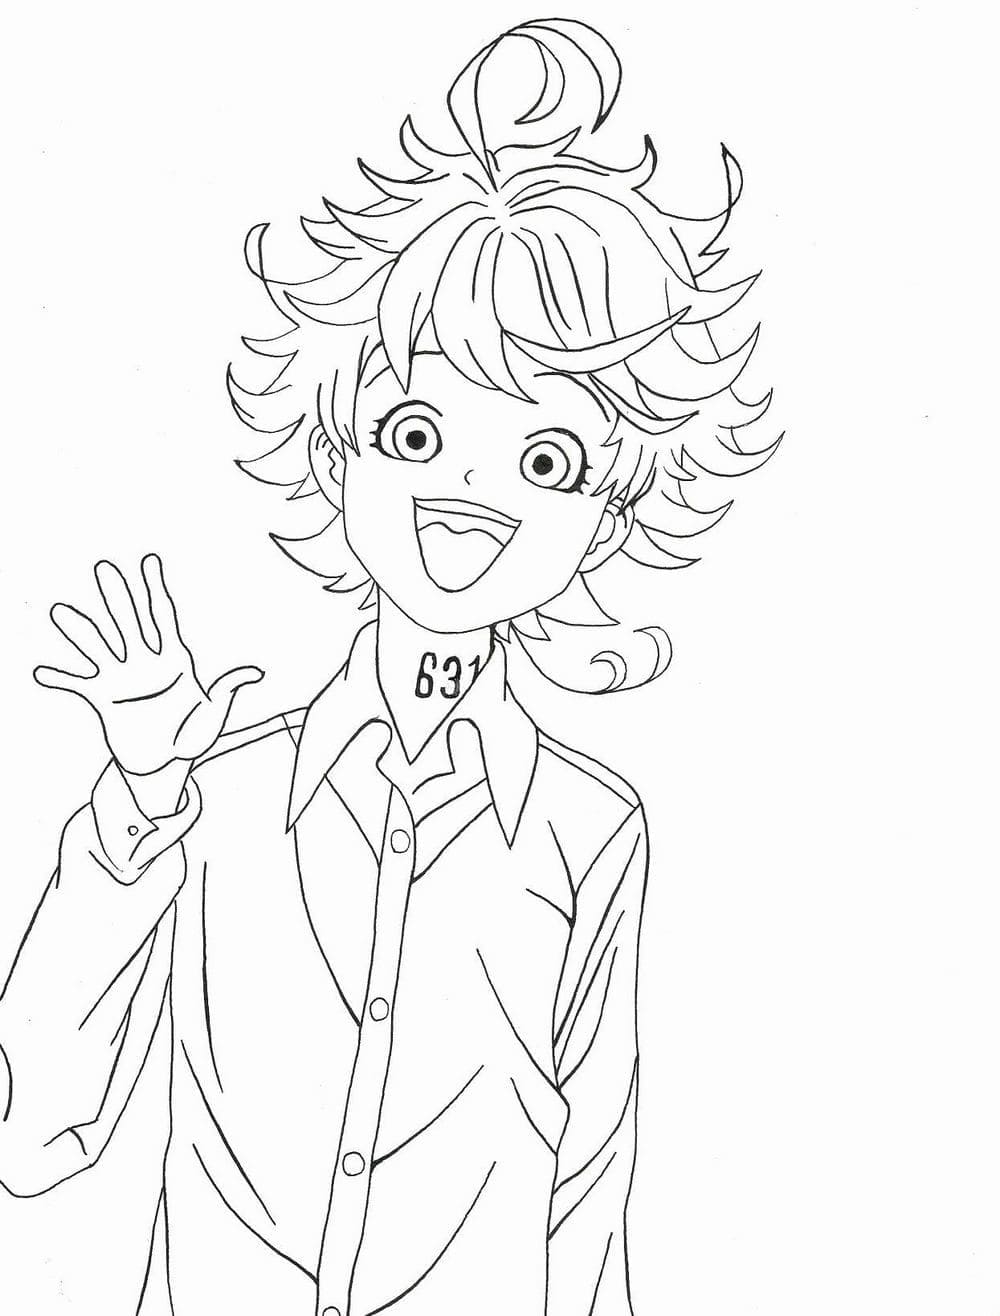 Cute Emma from The Promised Neverland Coloring Page